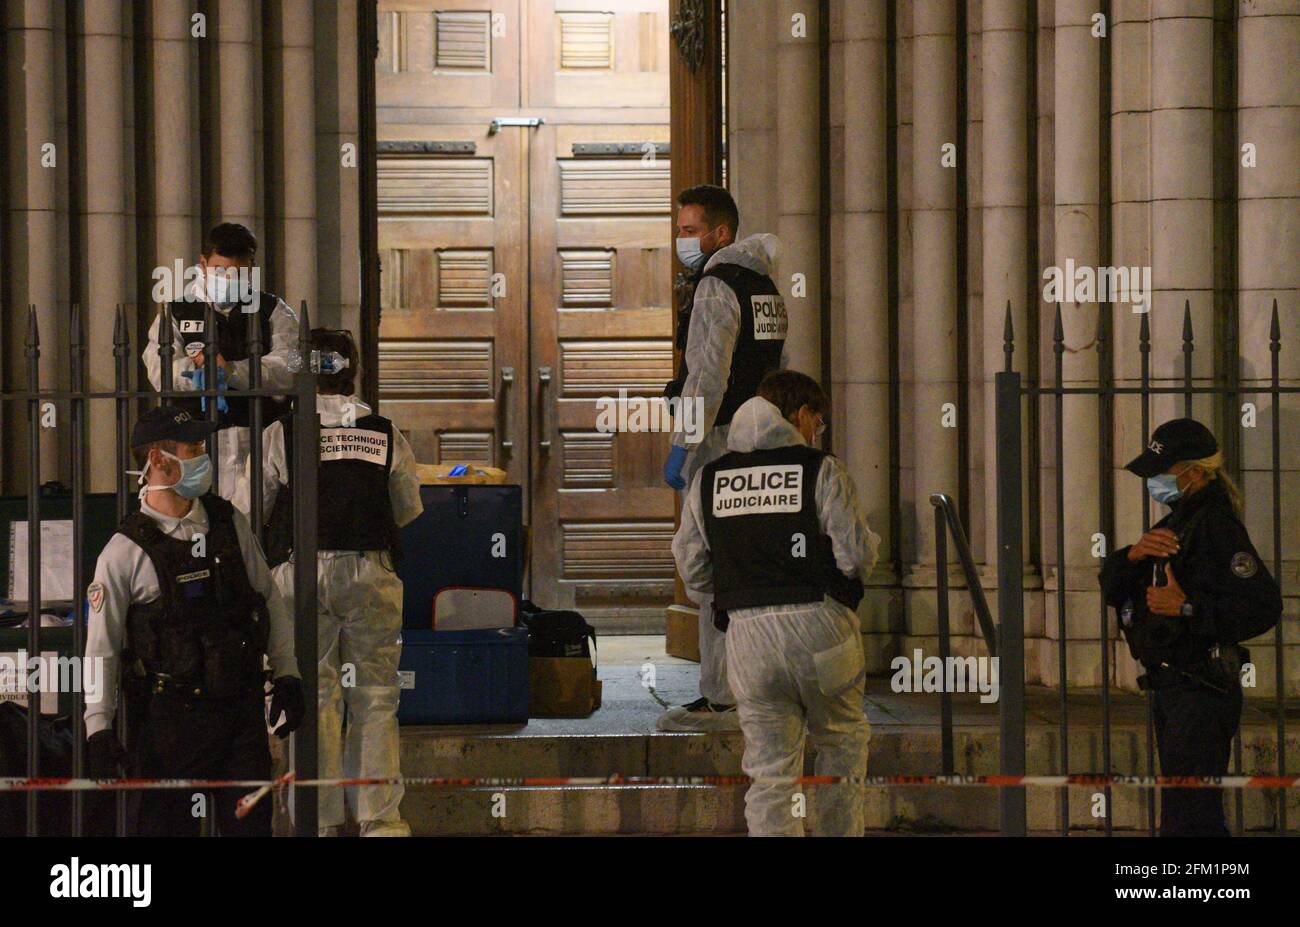 *** STRICTLY NO SALES TO FRENCH MEDIA OR PUBLISHERS - RIGHTS RESERVED ***October 29, 2020 - Nice, France: French investigators enter the Notre-Dame basilica, where an assailant killed three people in a knife attack. Stock Photo